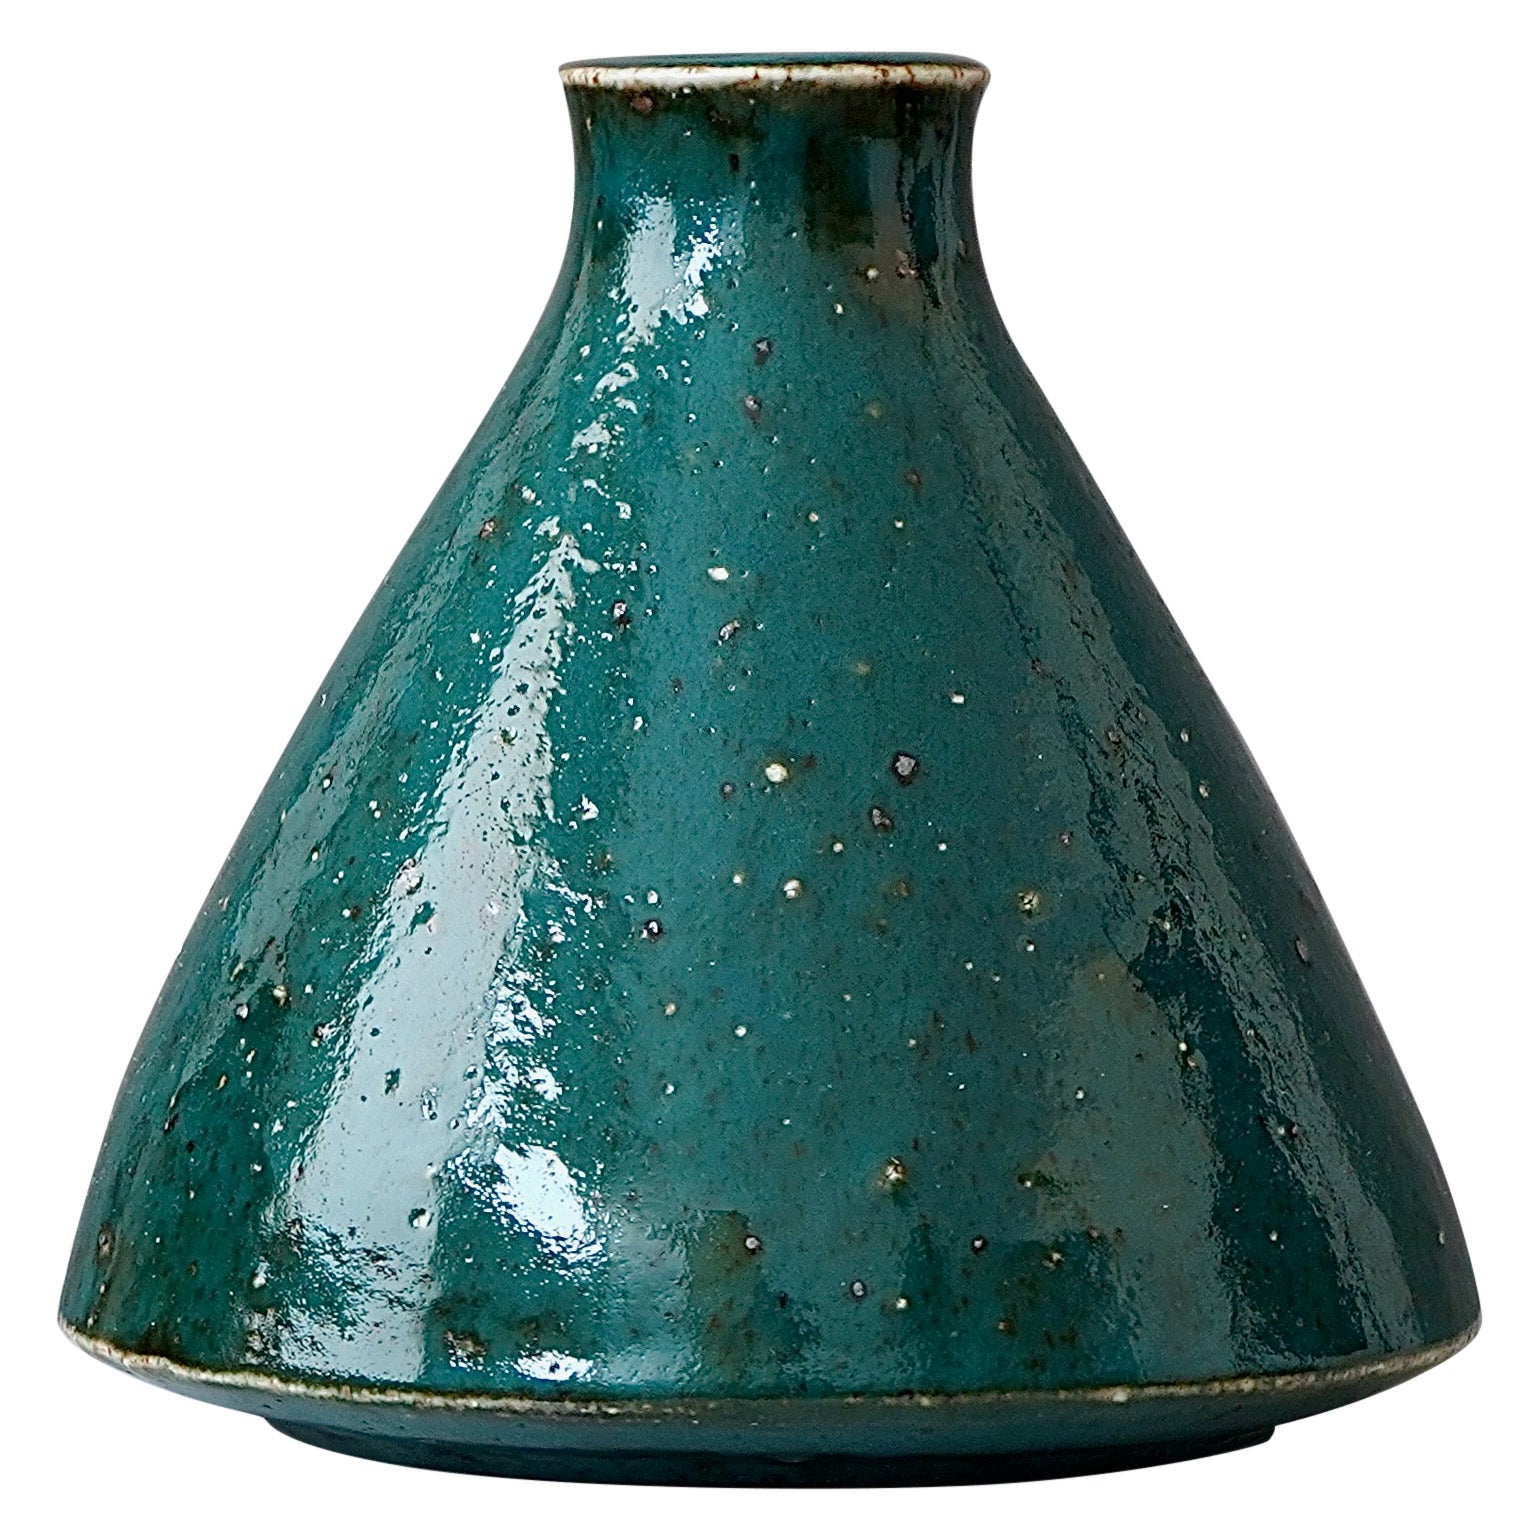 Stoneware Vase by Marianne Westman for Rorstrand, Sweden, 1960s